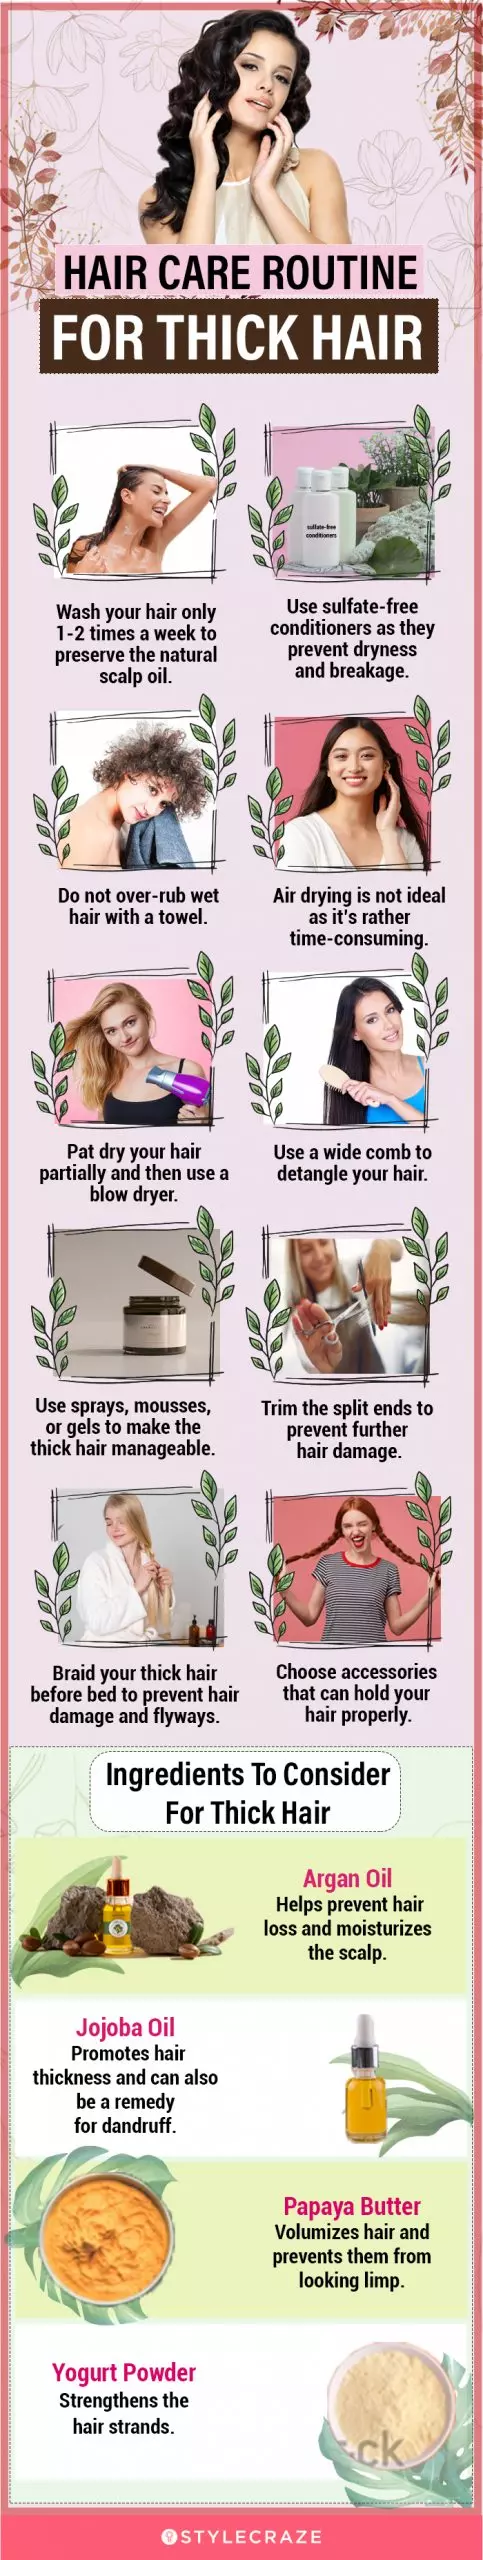 Hair Care Routine For Thick Hair (infographic)